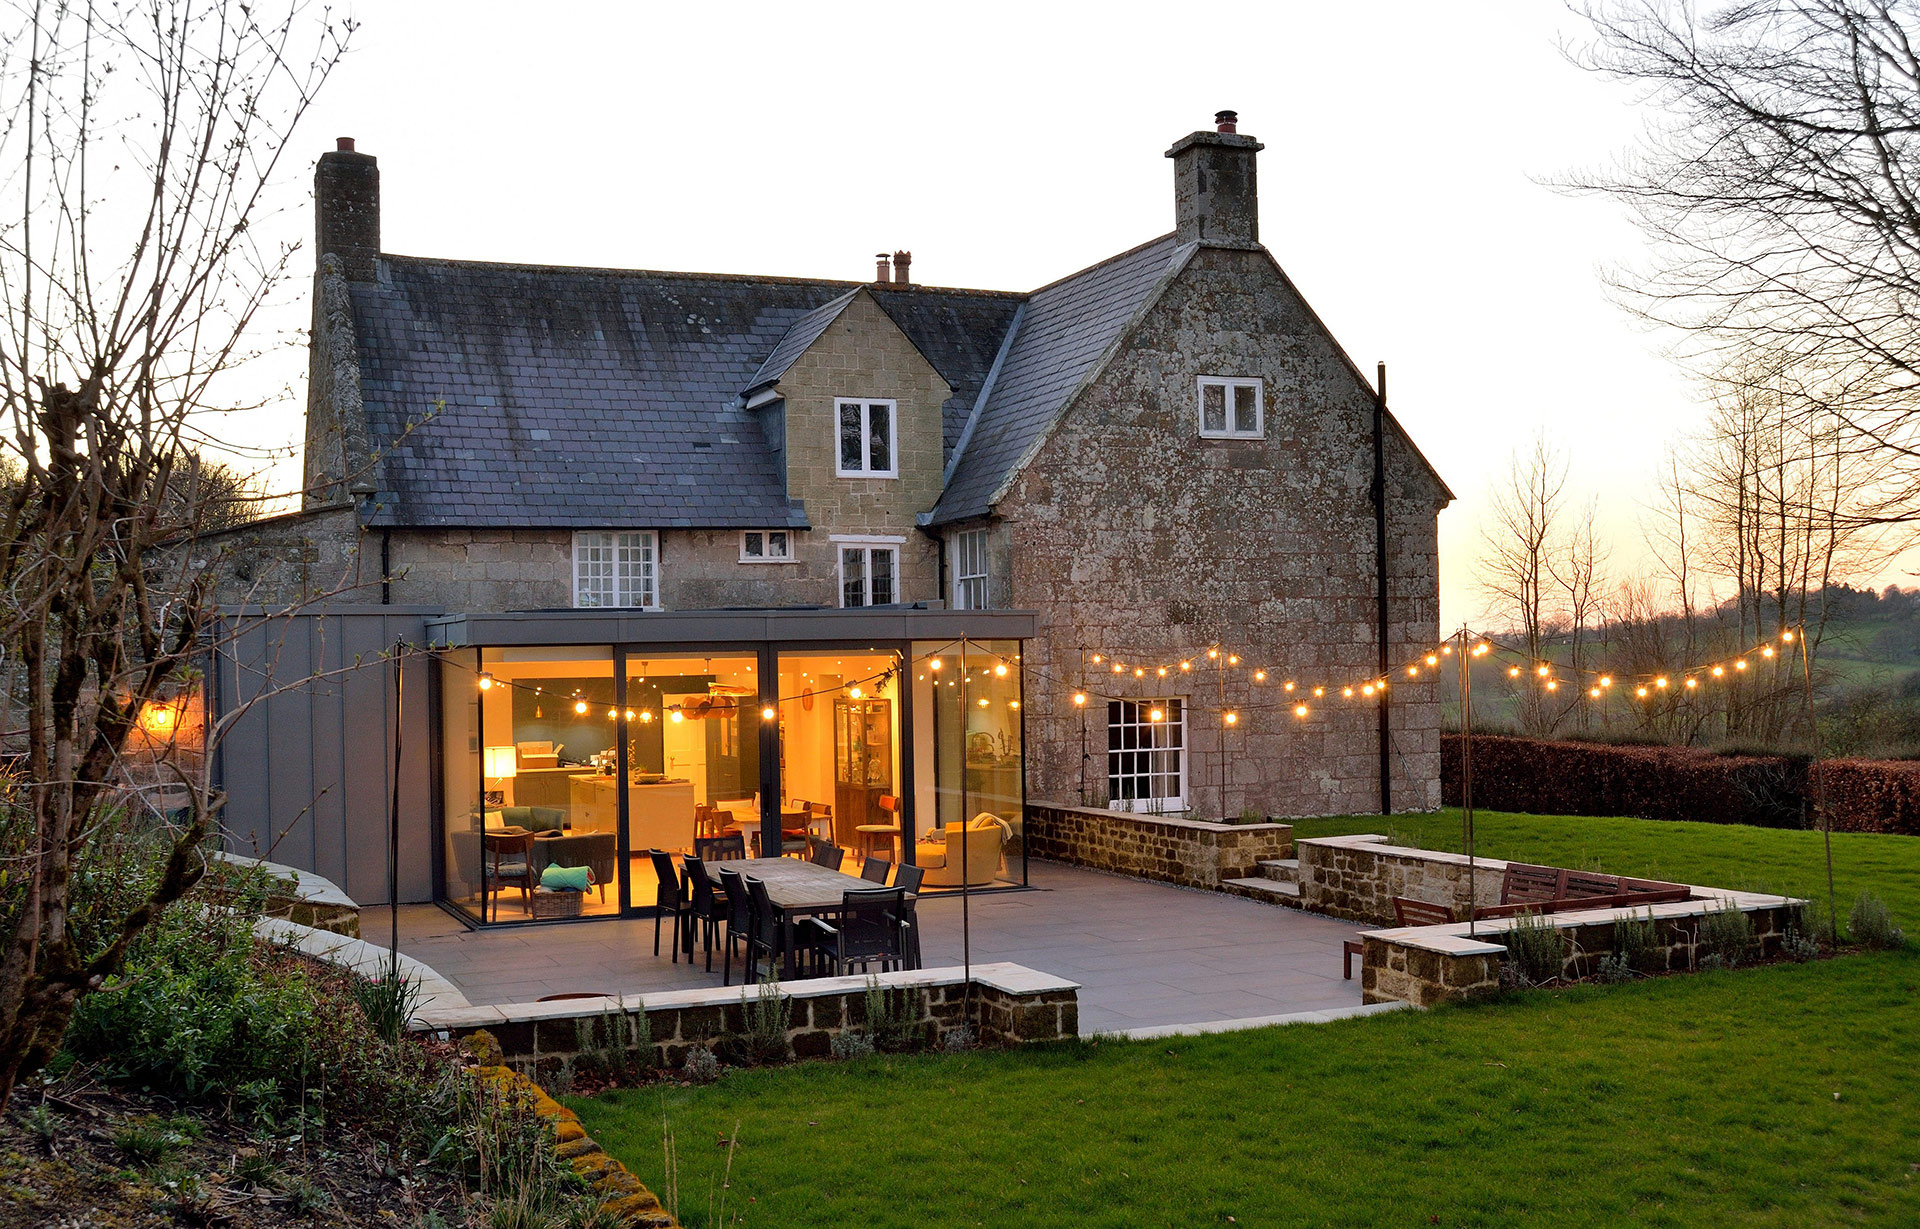 modern extension of traditional stone house with large patio area taken at dusk with lights on